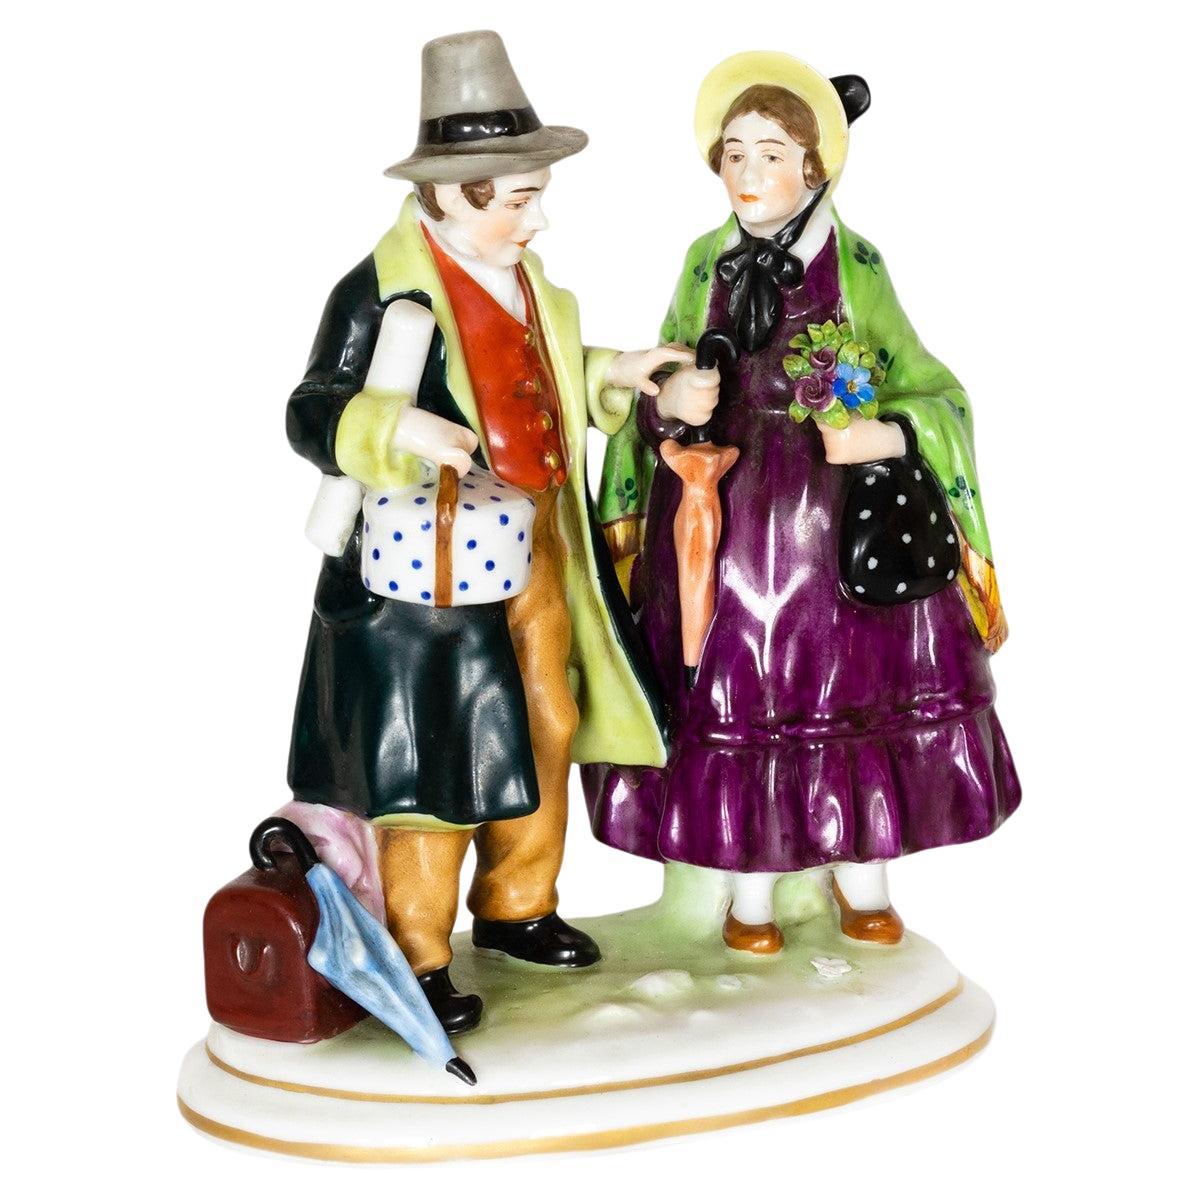 Late 18th Century traveling couple figurine by Capodimonete 1771 - 1834 For Sale